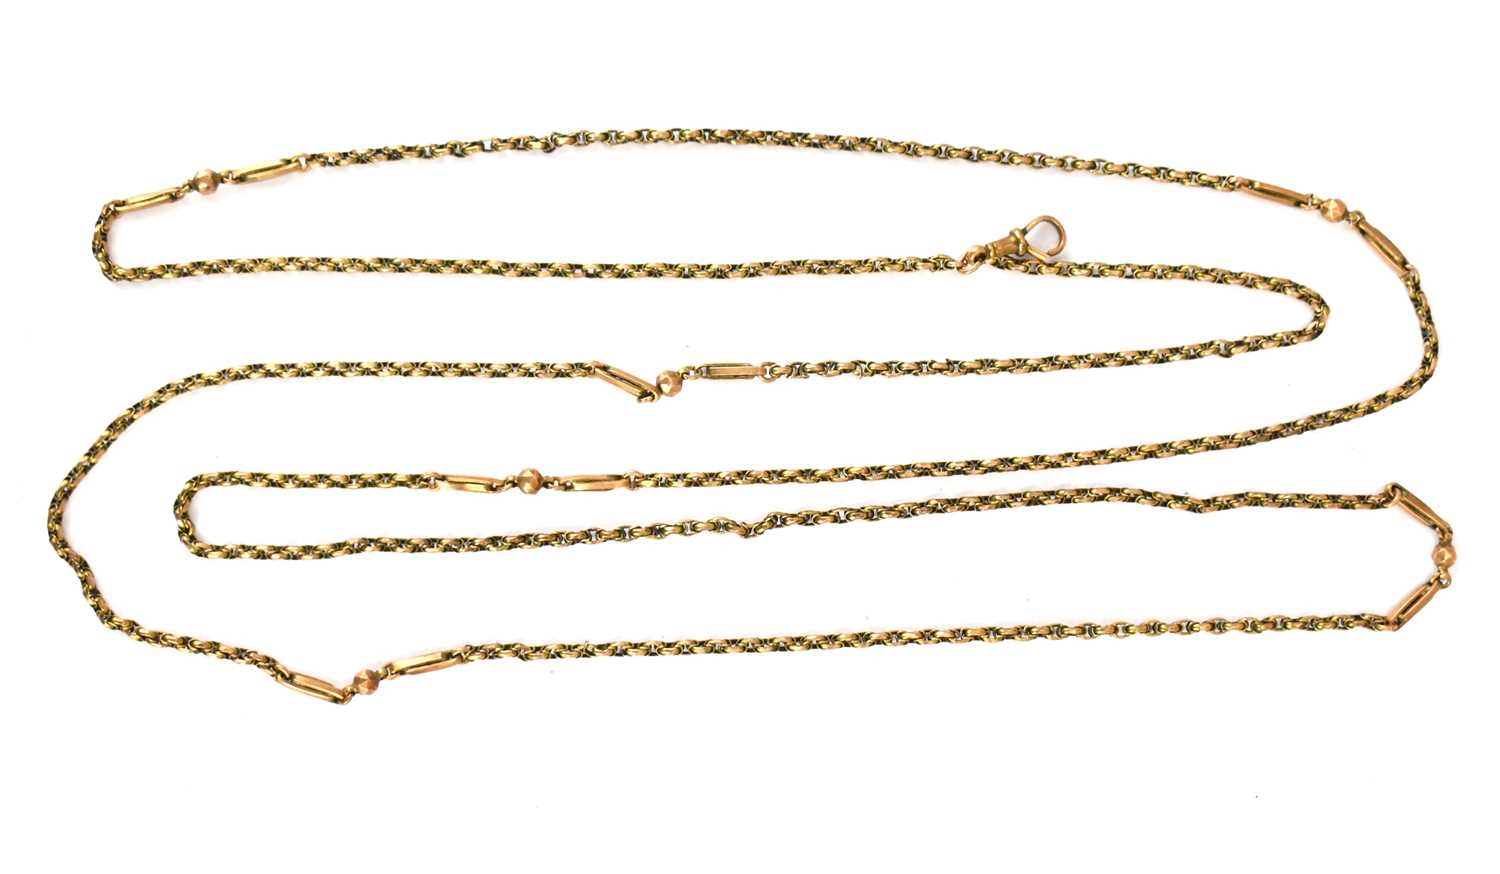 A 9ct rose gold muff chain with swivel clasp and tag which states 9ct, length 140cm, approx. 25.9g.